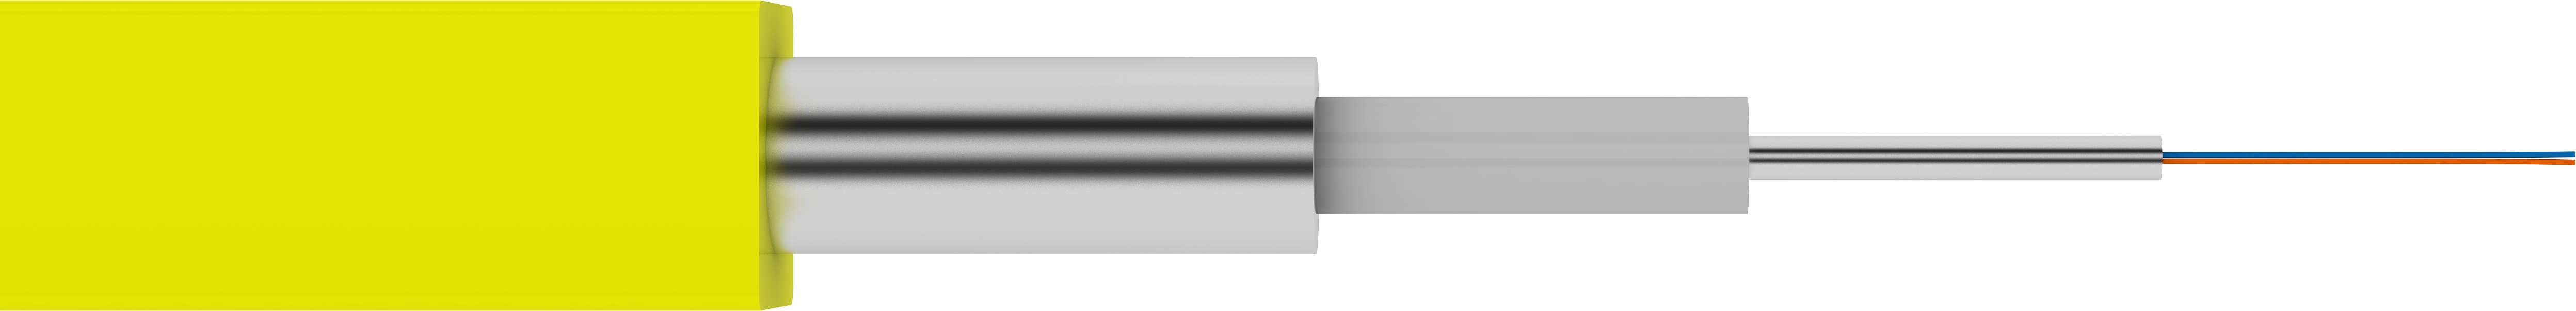 Cable side view